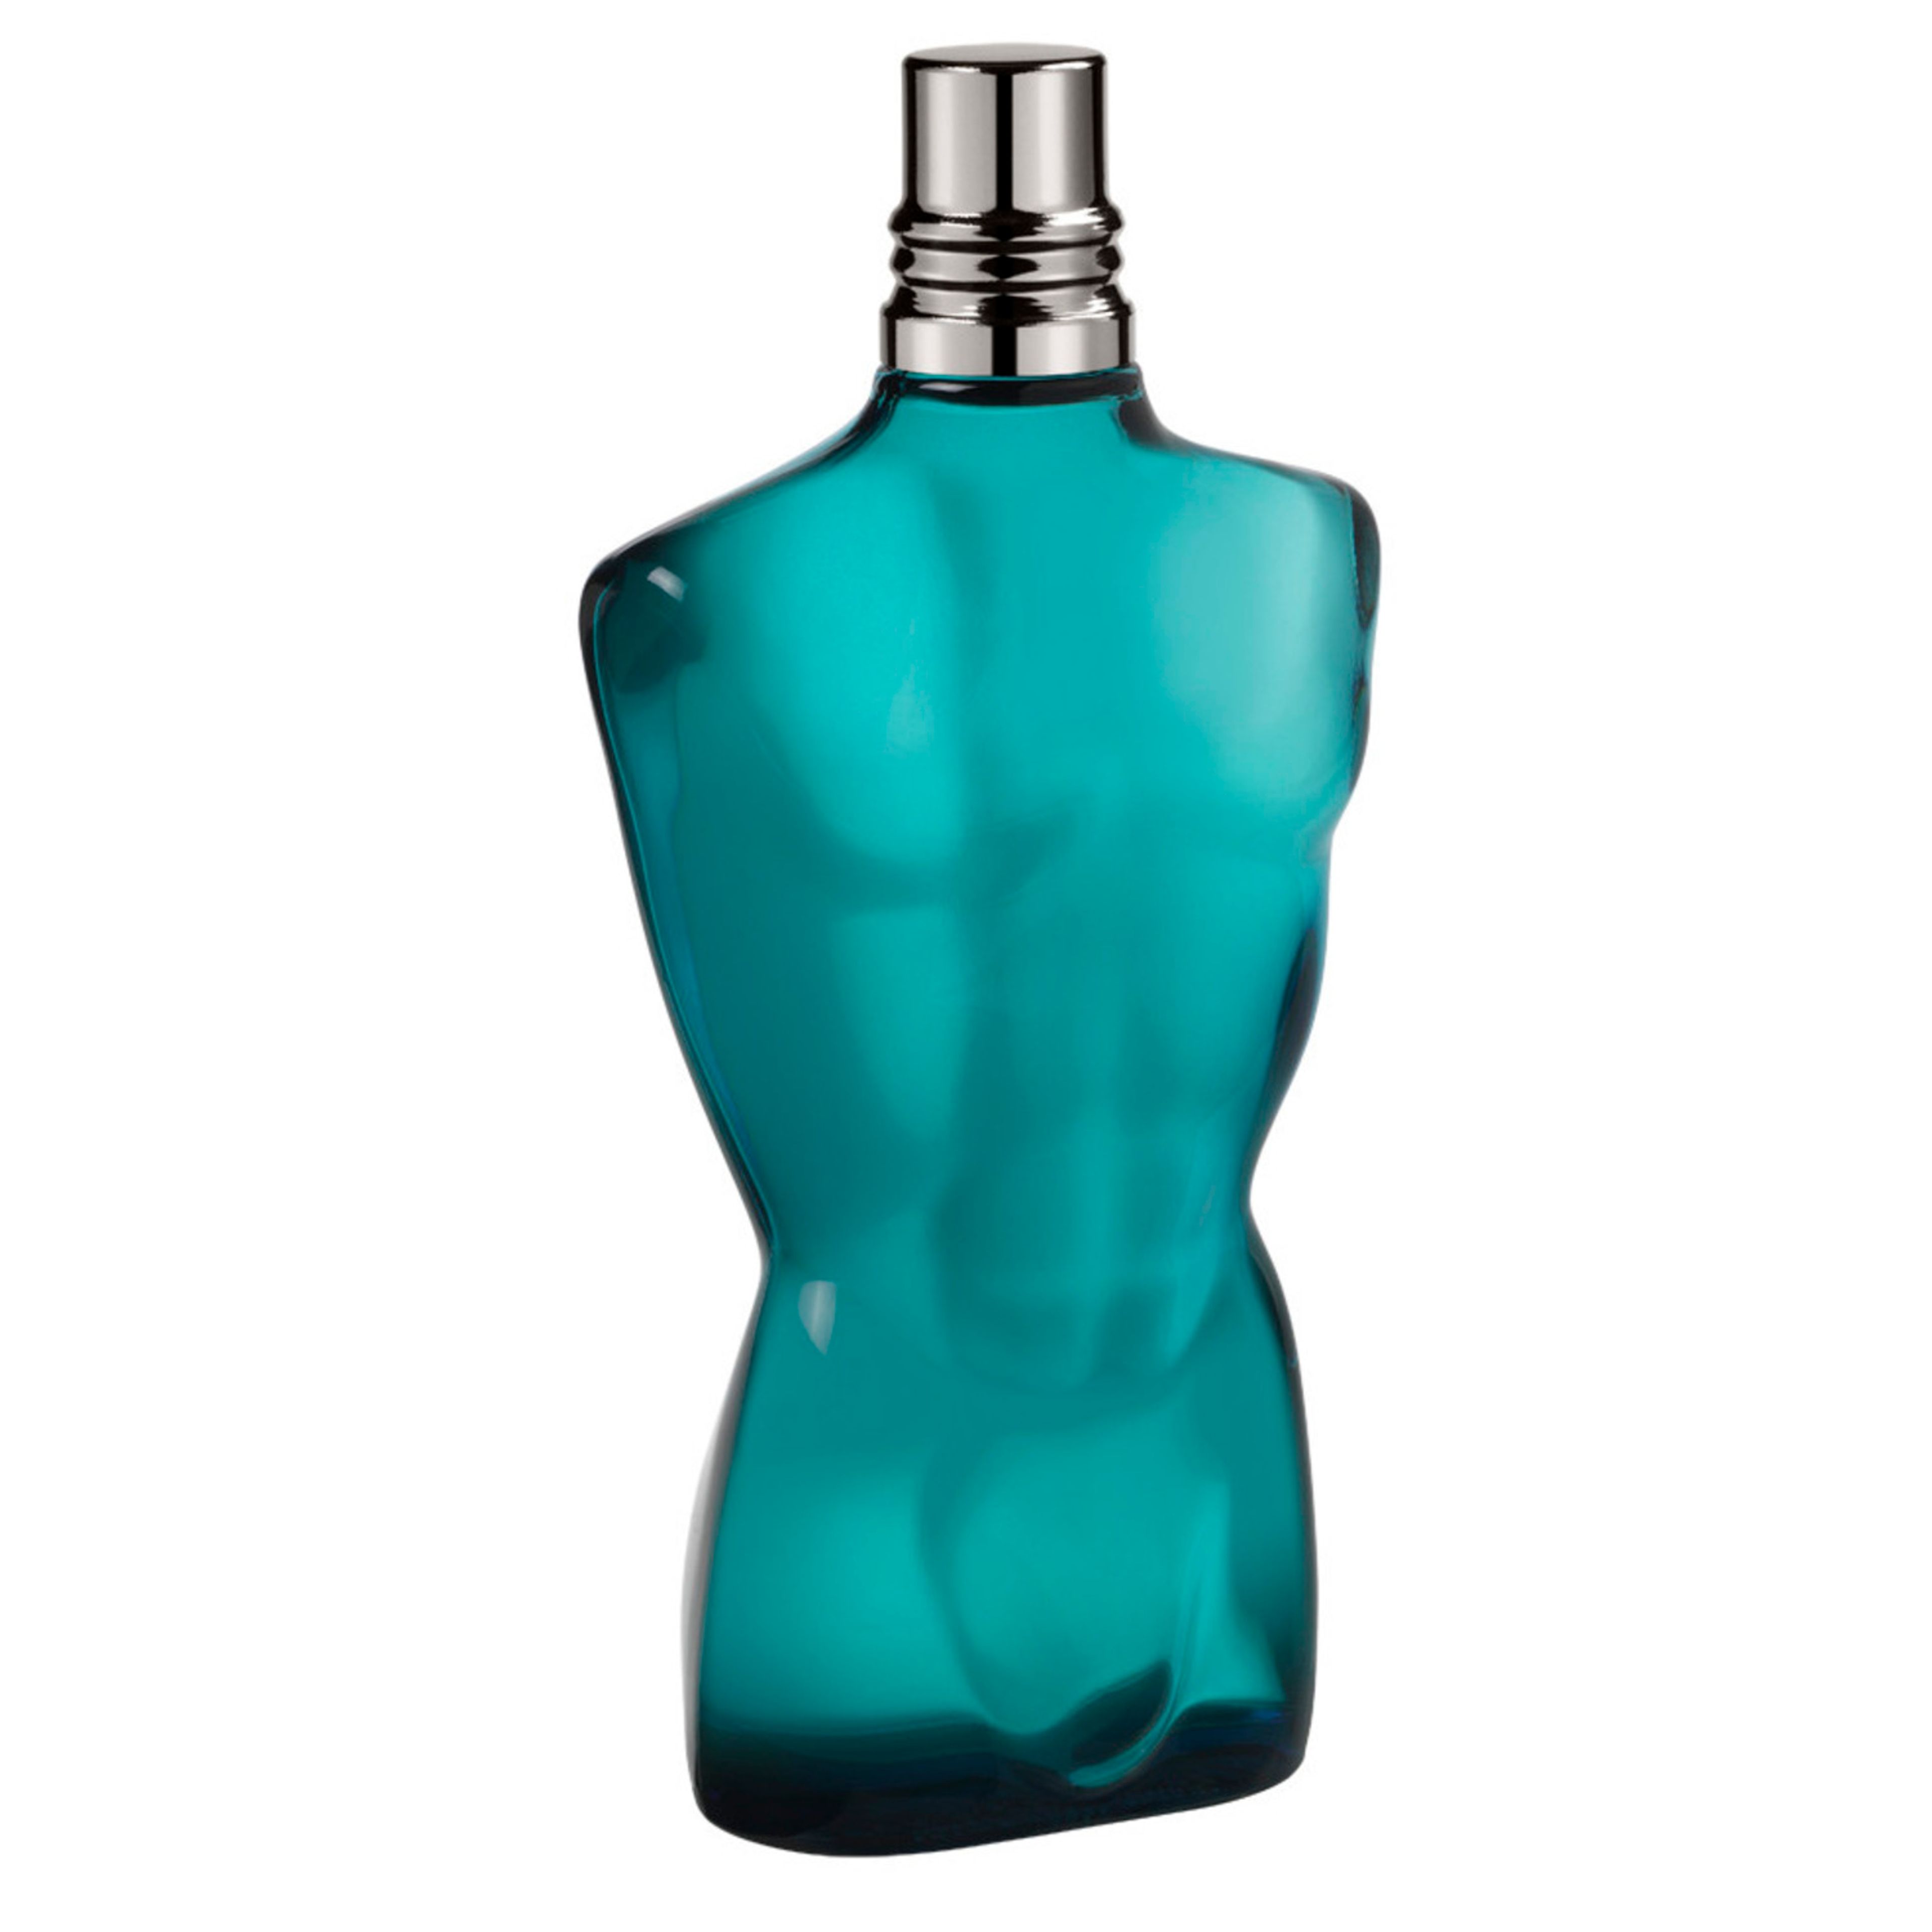 Jean Paul Gaultier Le Male - After Shave Lotion 2